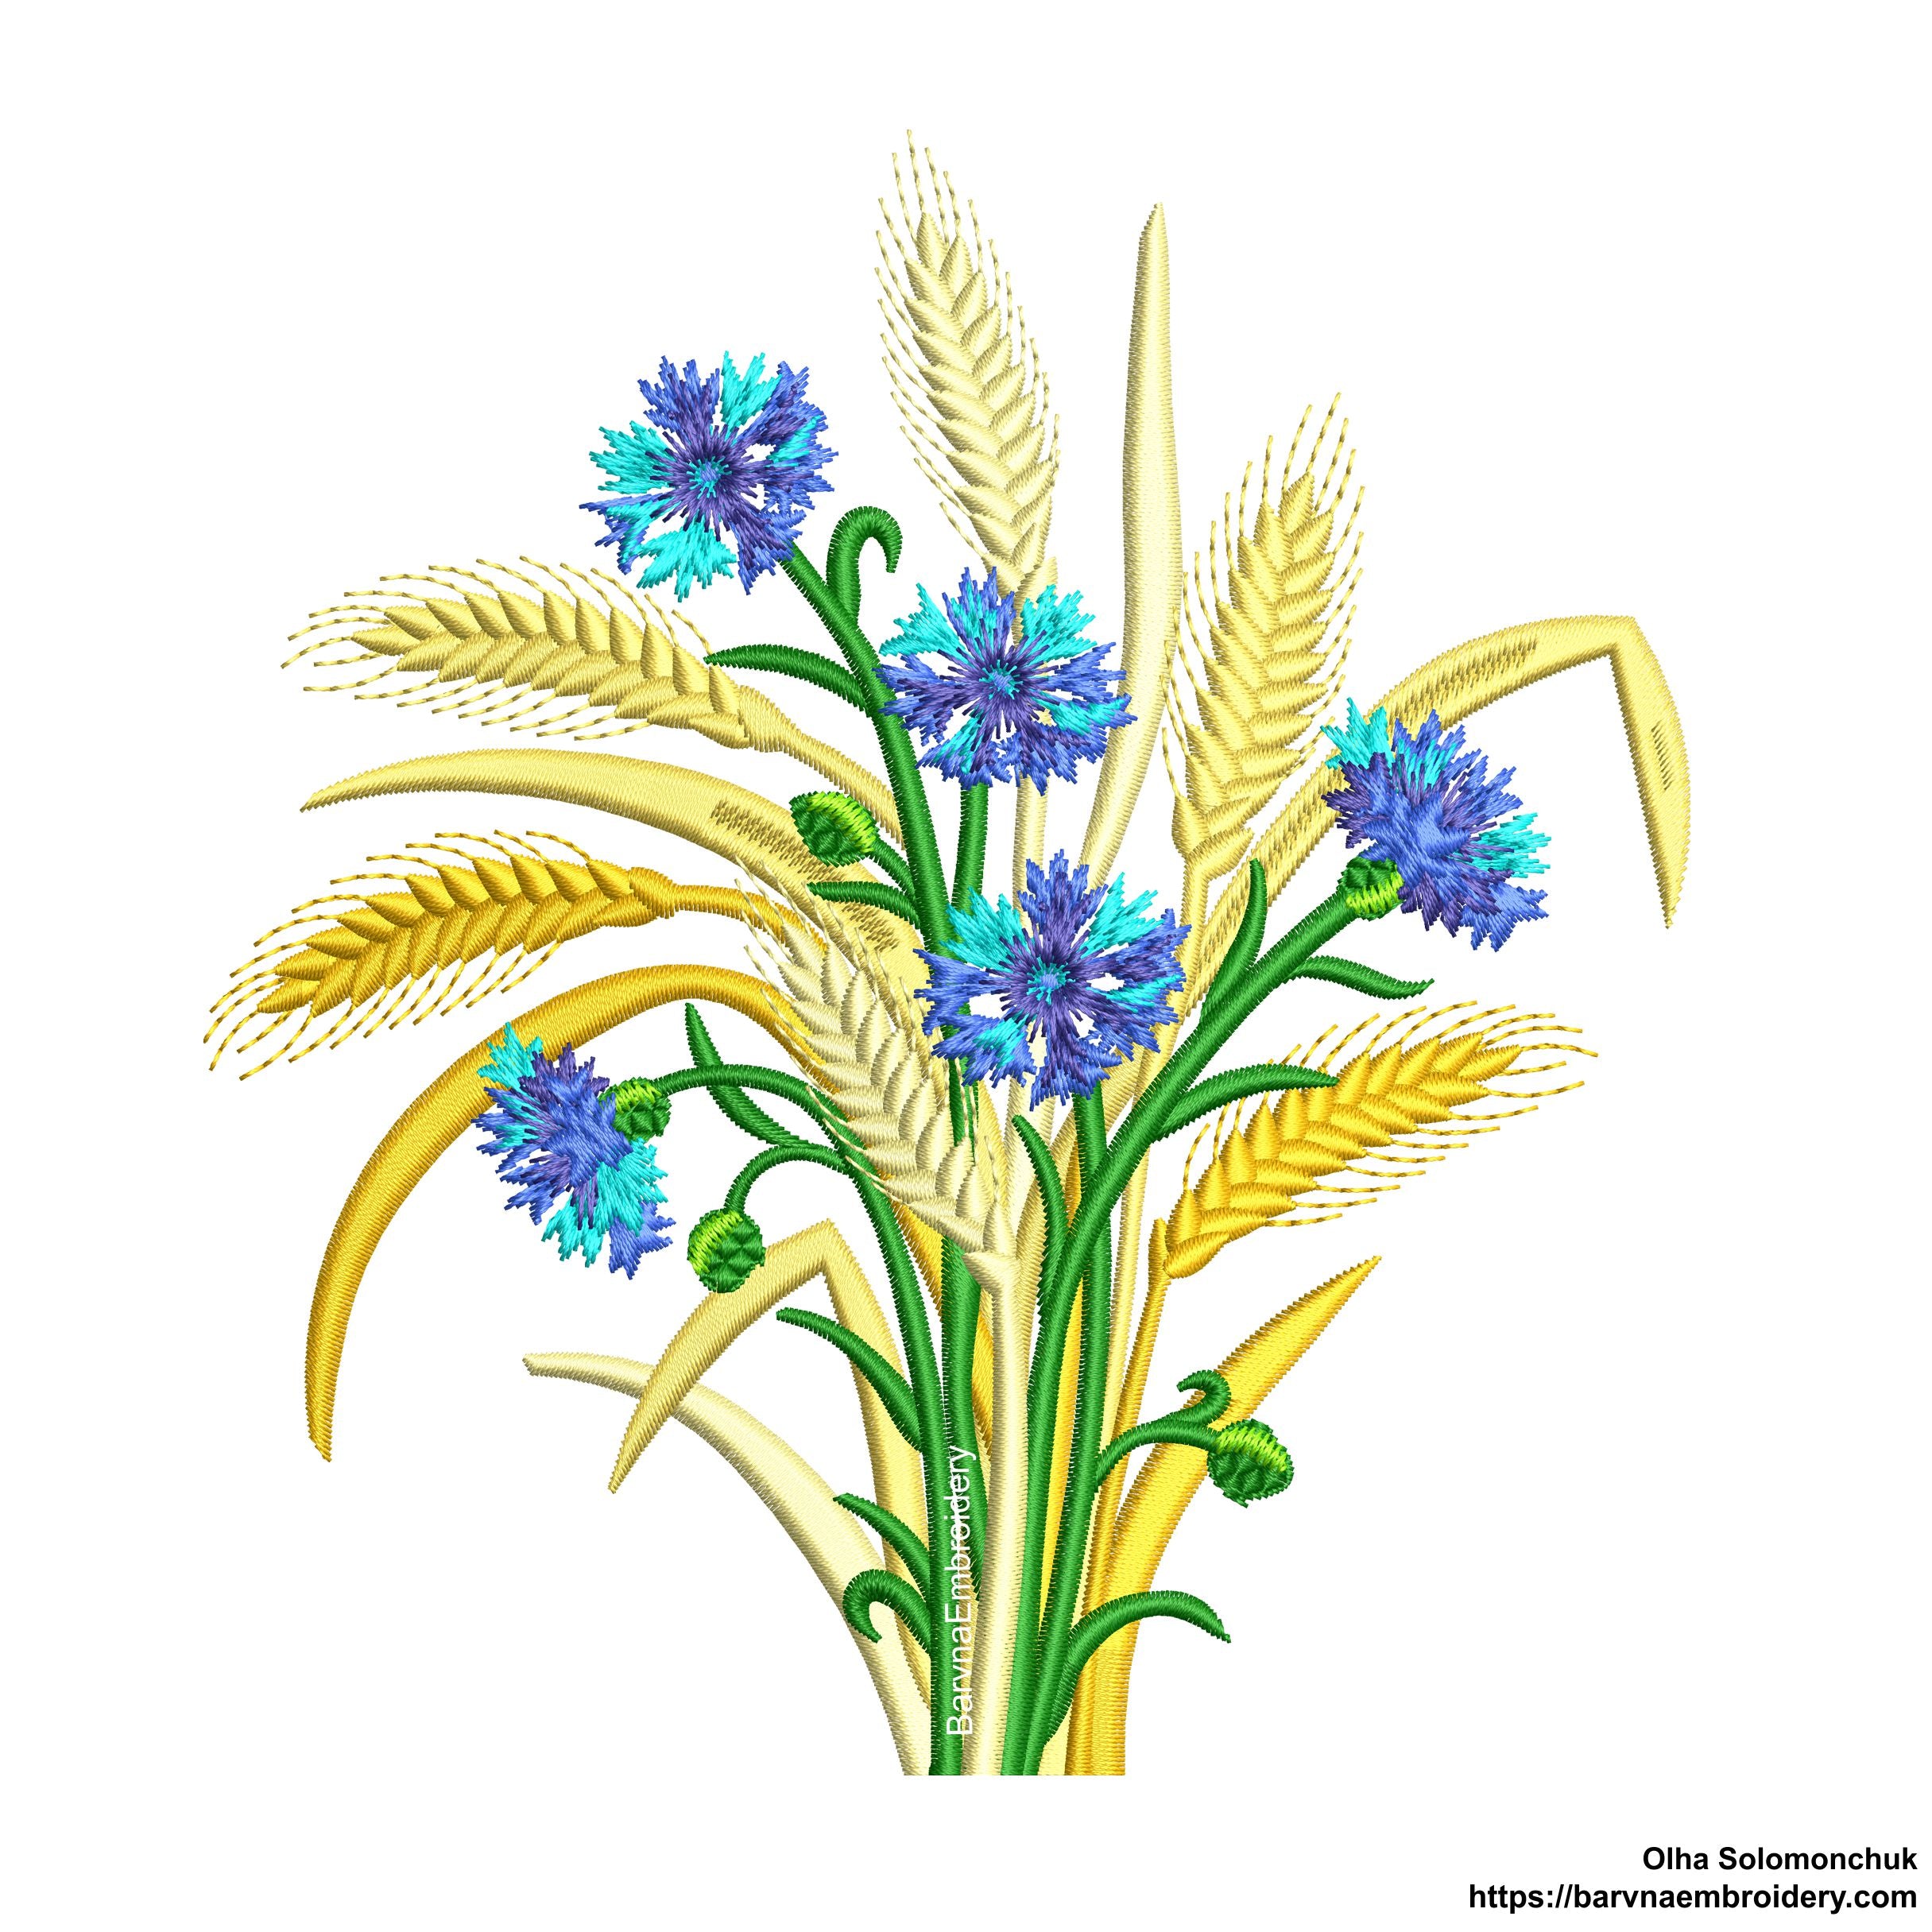 Cornflowers and Wheat spikelets machine embroidery designs, Instant download